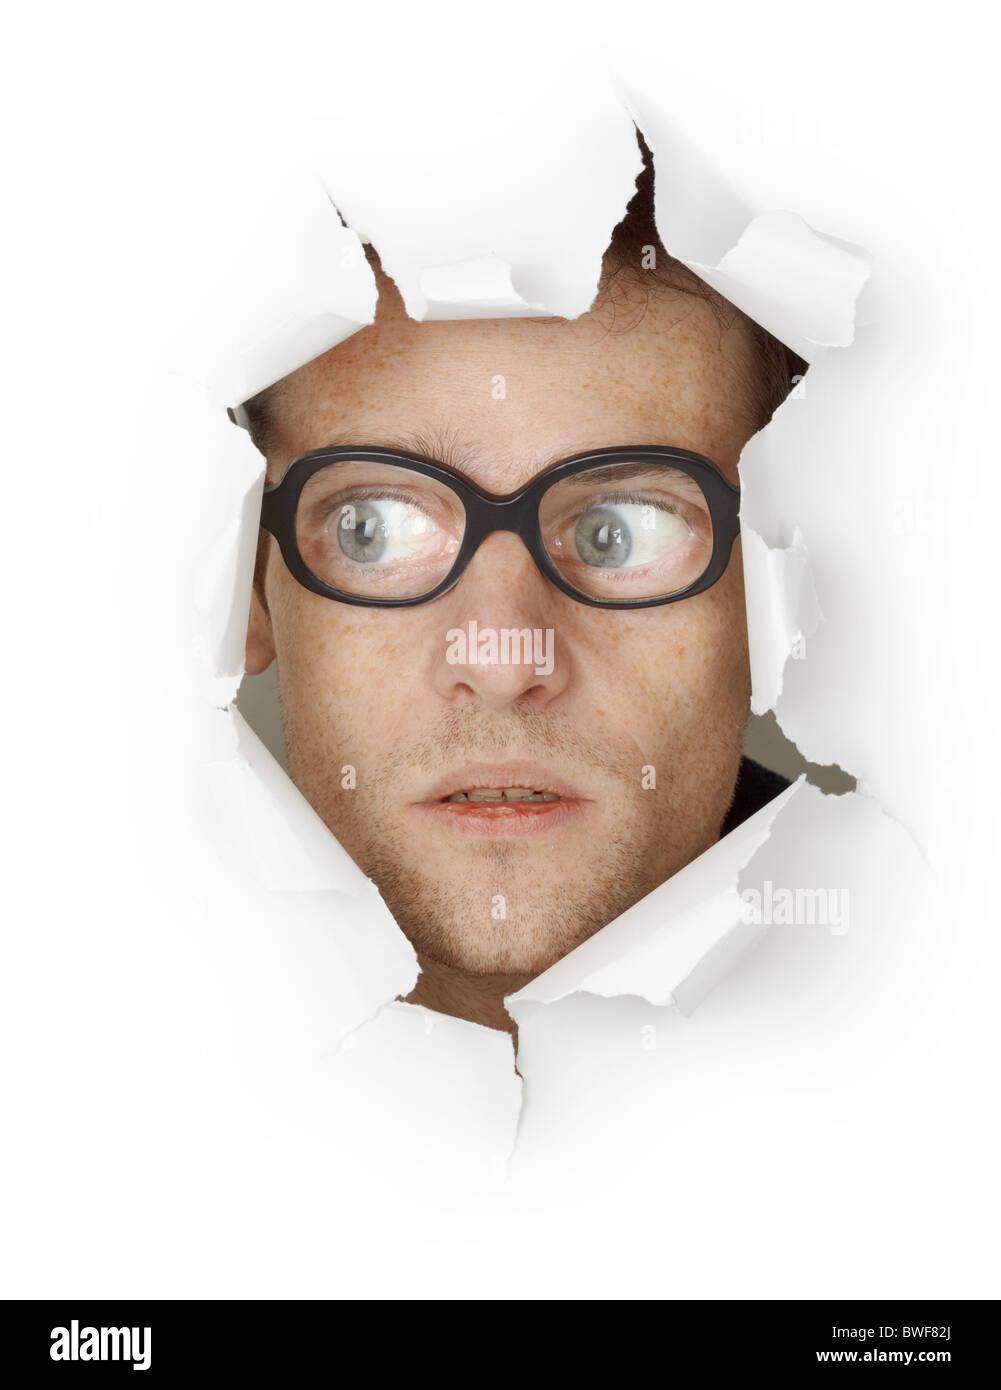 Funny man in an old-fashioned glasses looking out of the hole isolated on white background Stock Photo